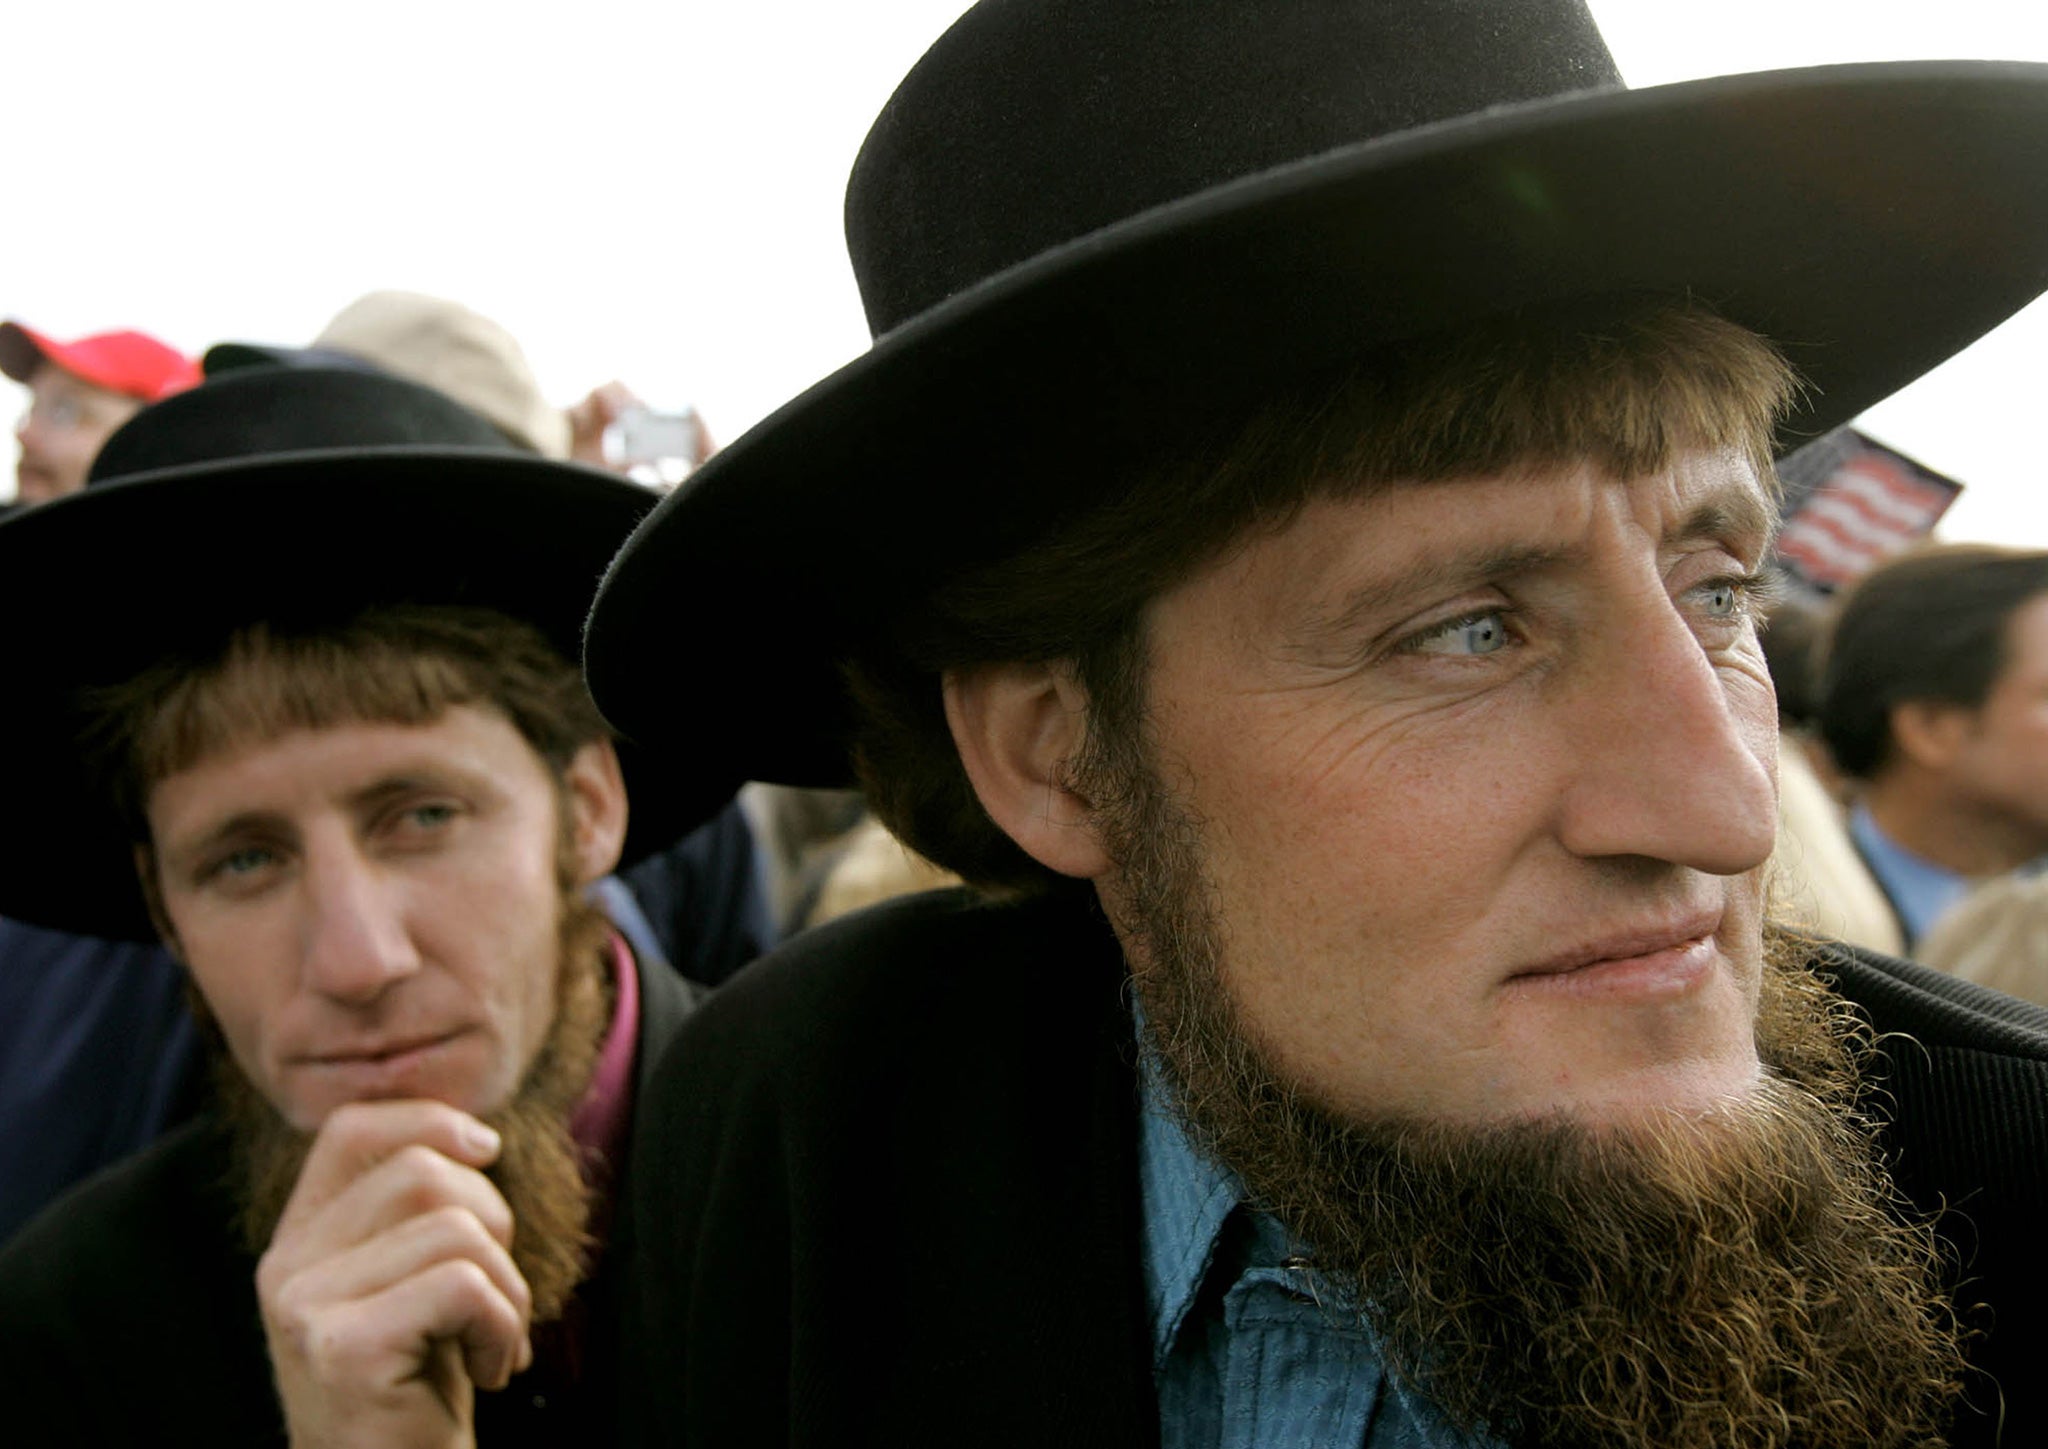 Two Amish men with less of a concern regarding graven images